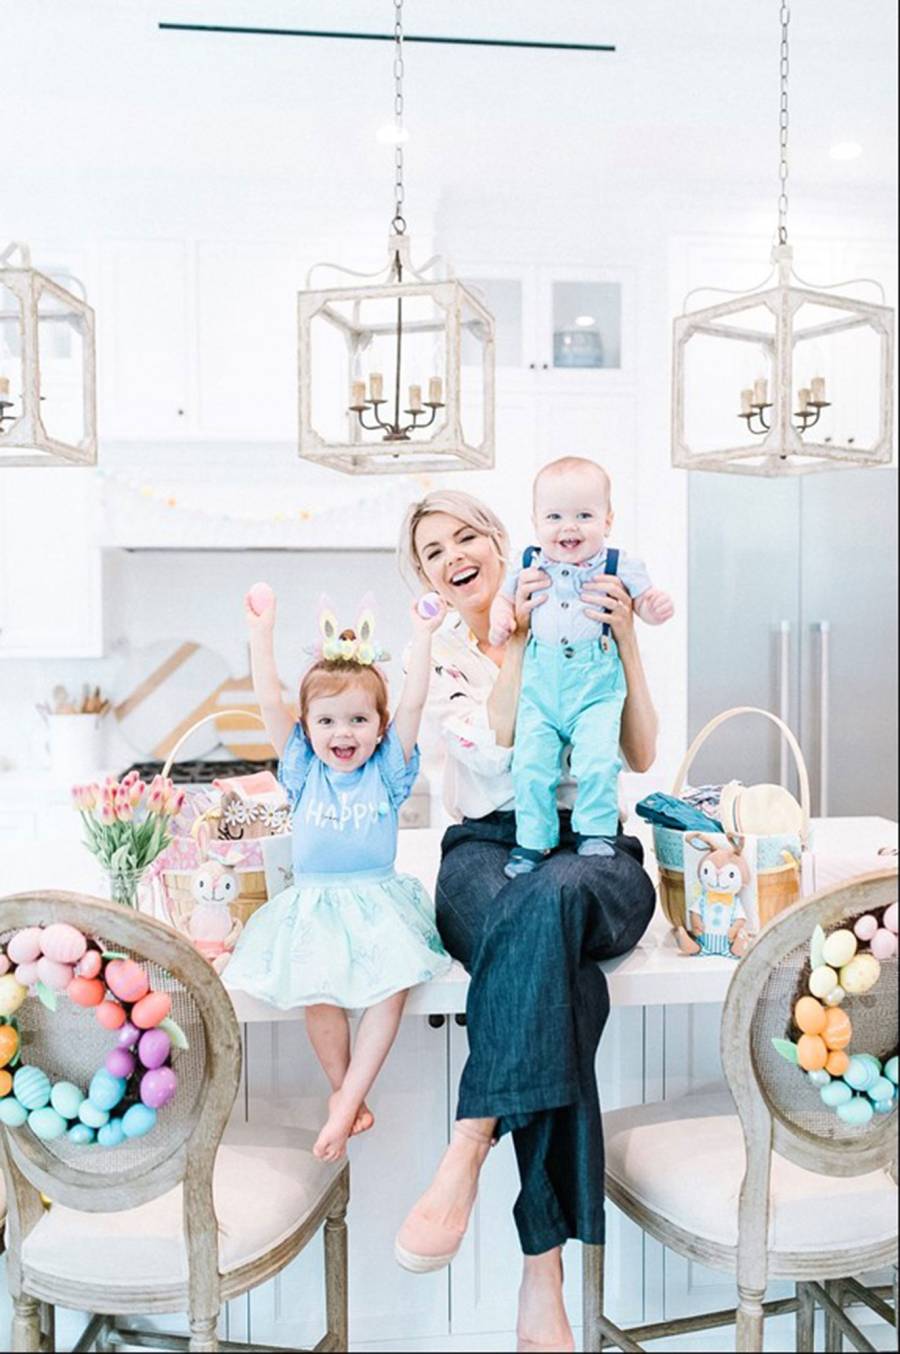 Ali Fedotowsky Manno easter